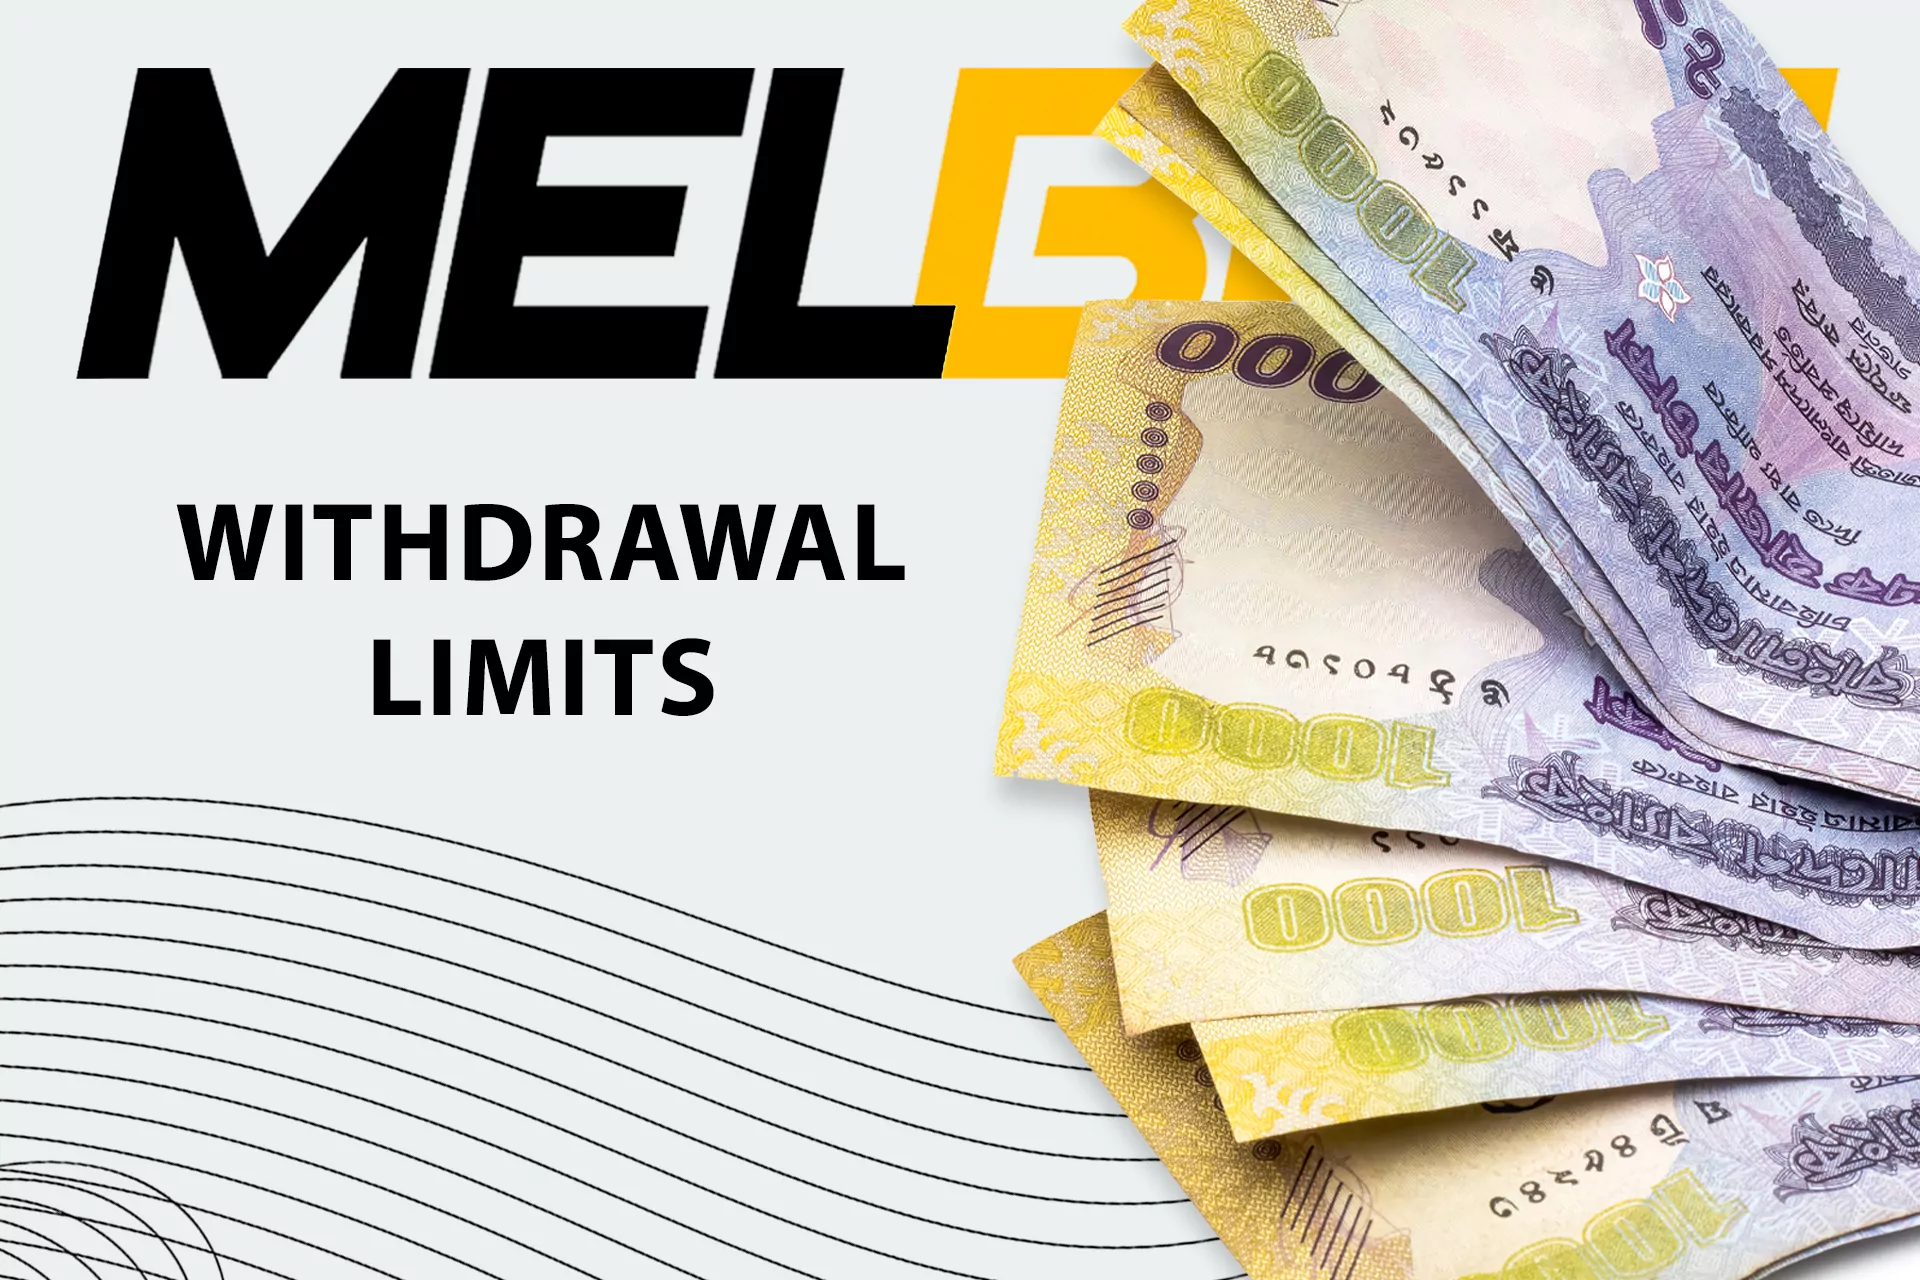 Check out Melbet withdrawal limits before transferring funds.